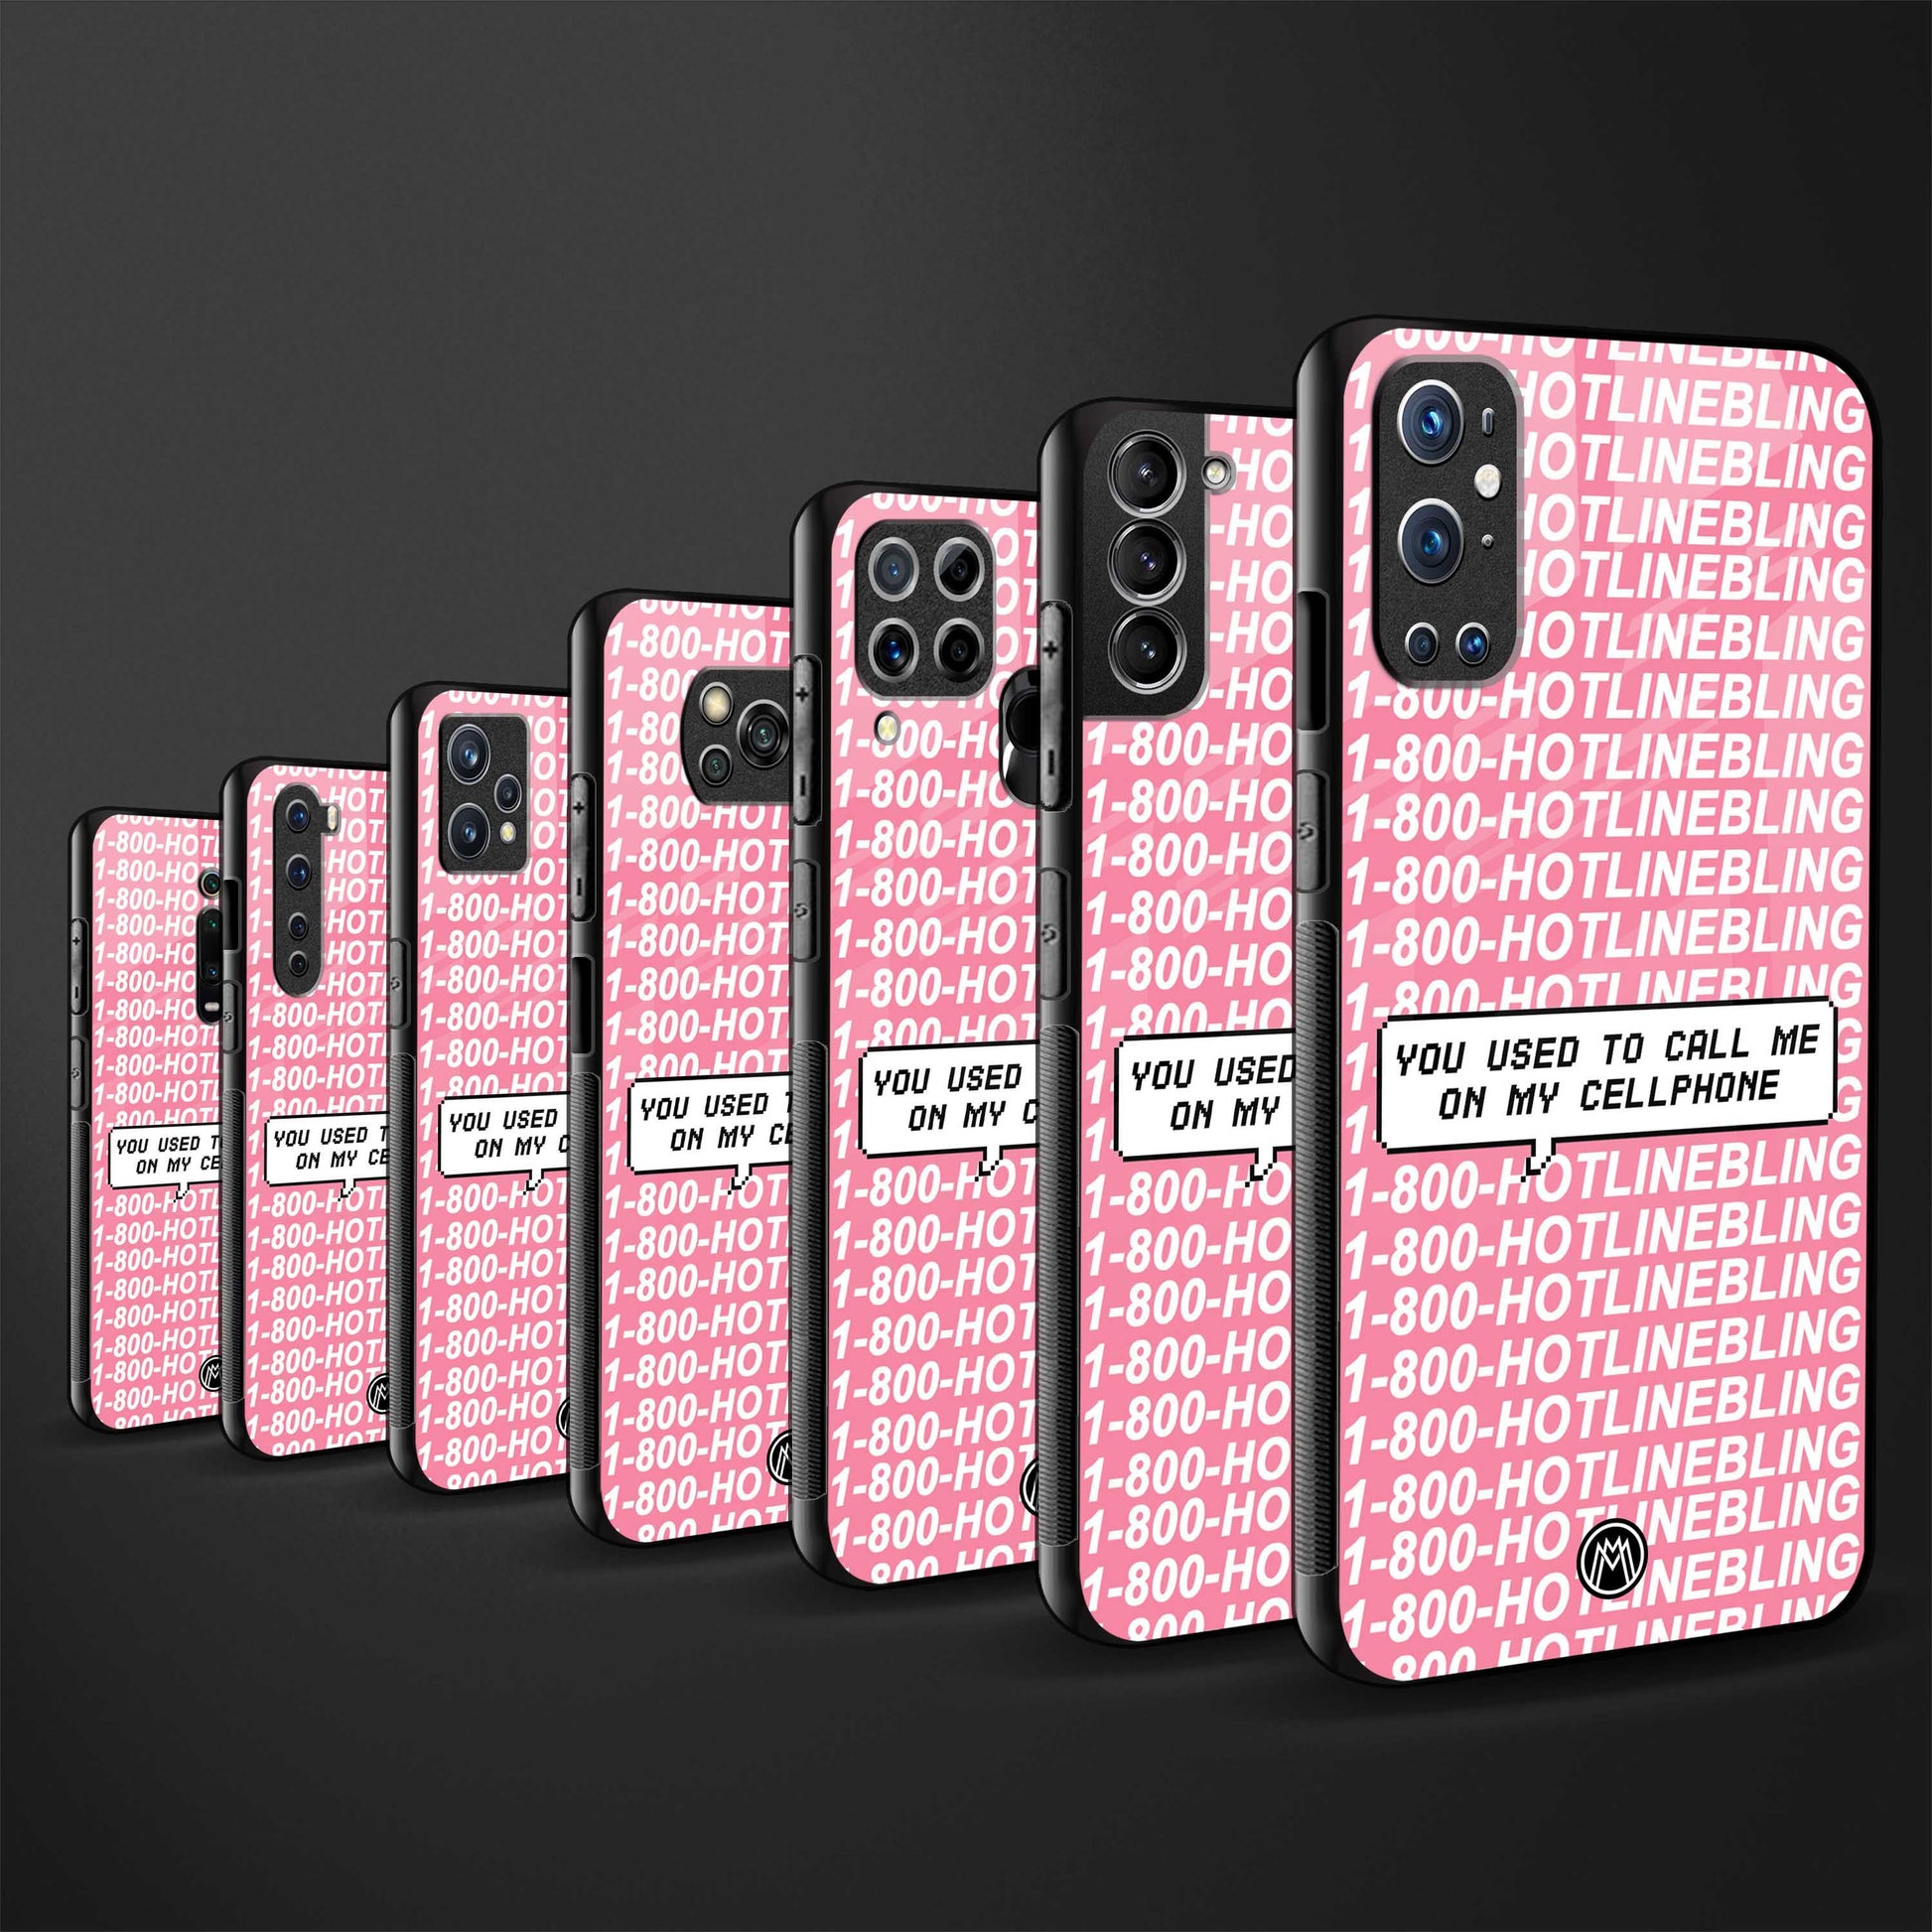 1800 hotline bling phone cover for samsung galaxy note 10 